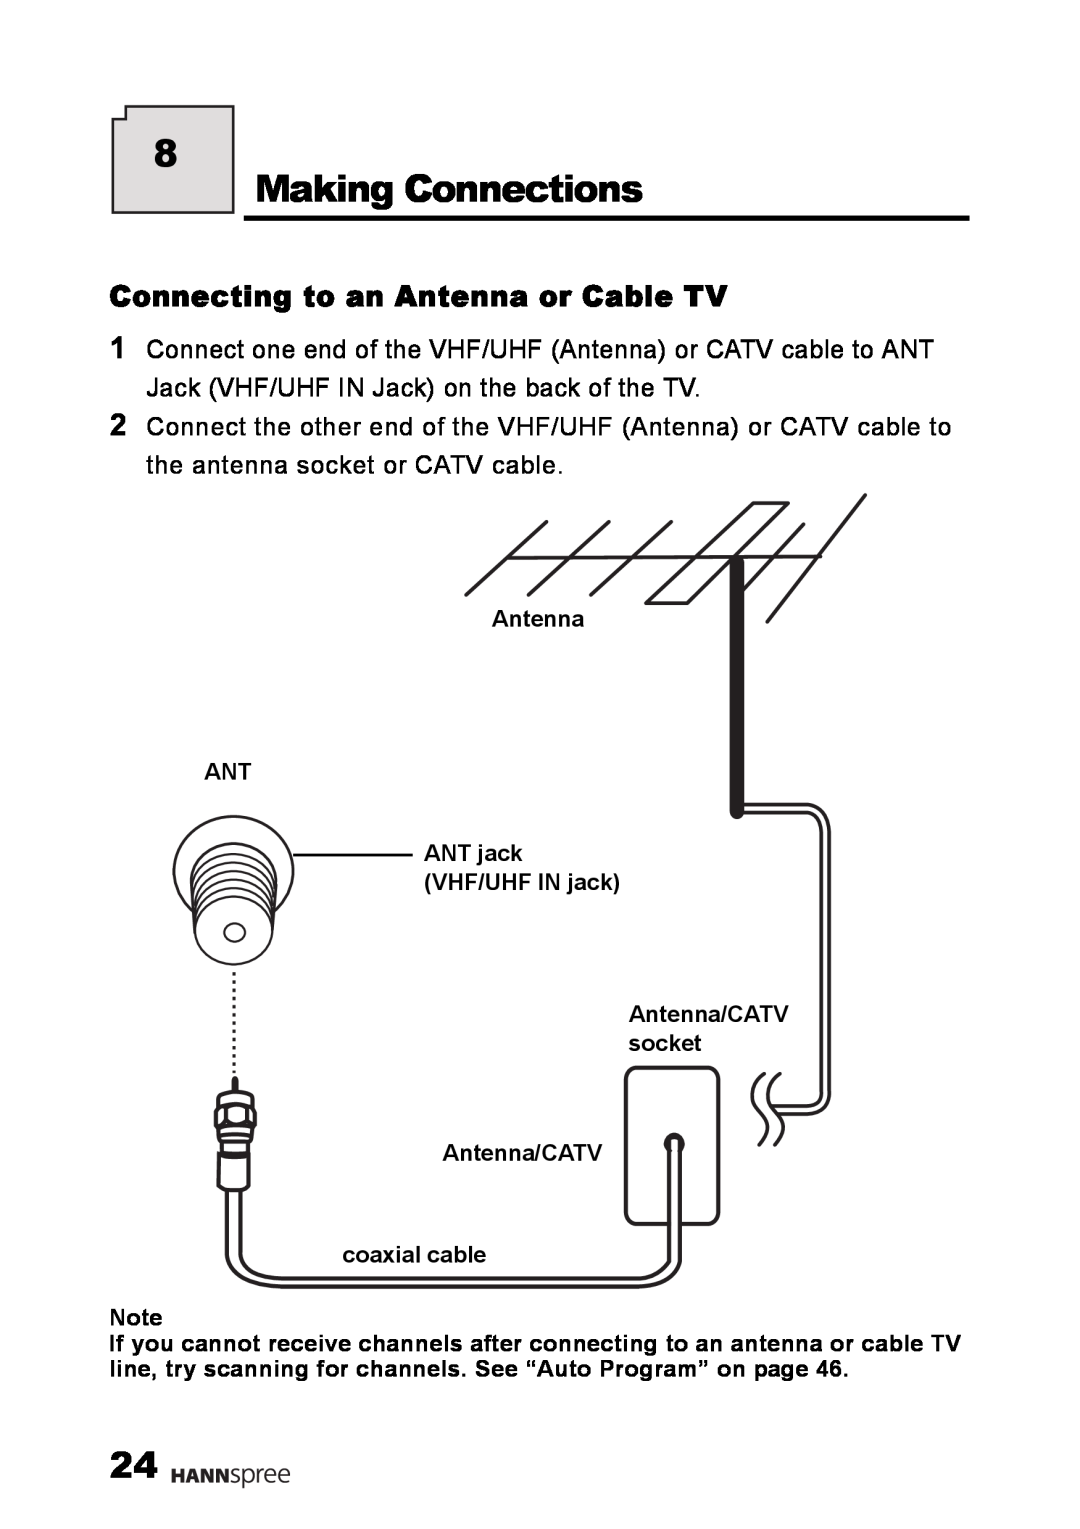 HANNspree LT09-10U1-000 user manual Making Connections, Connecting to an Antenna or Cable TV 